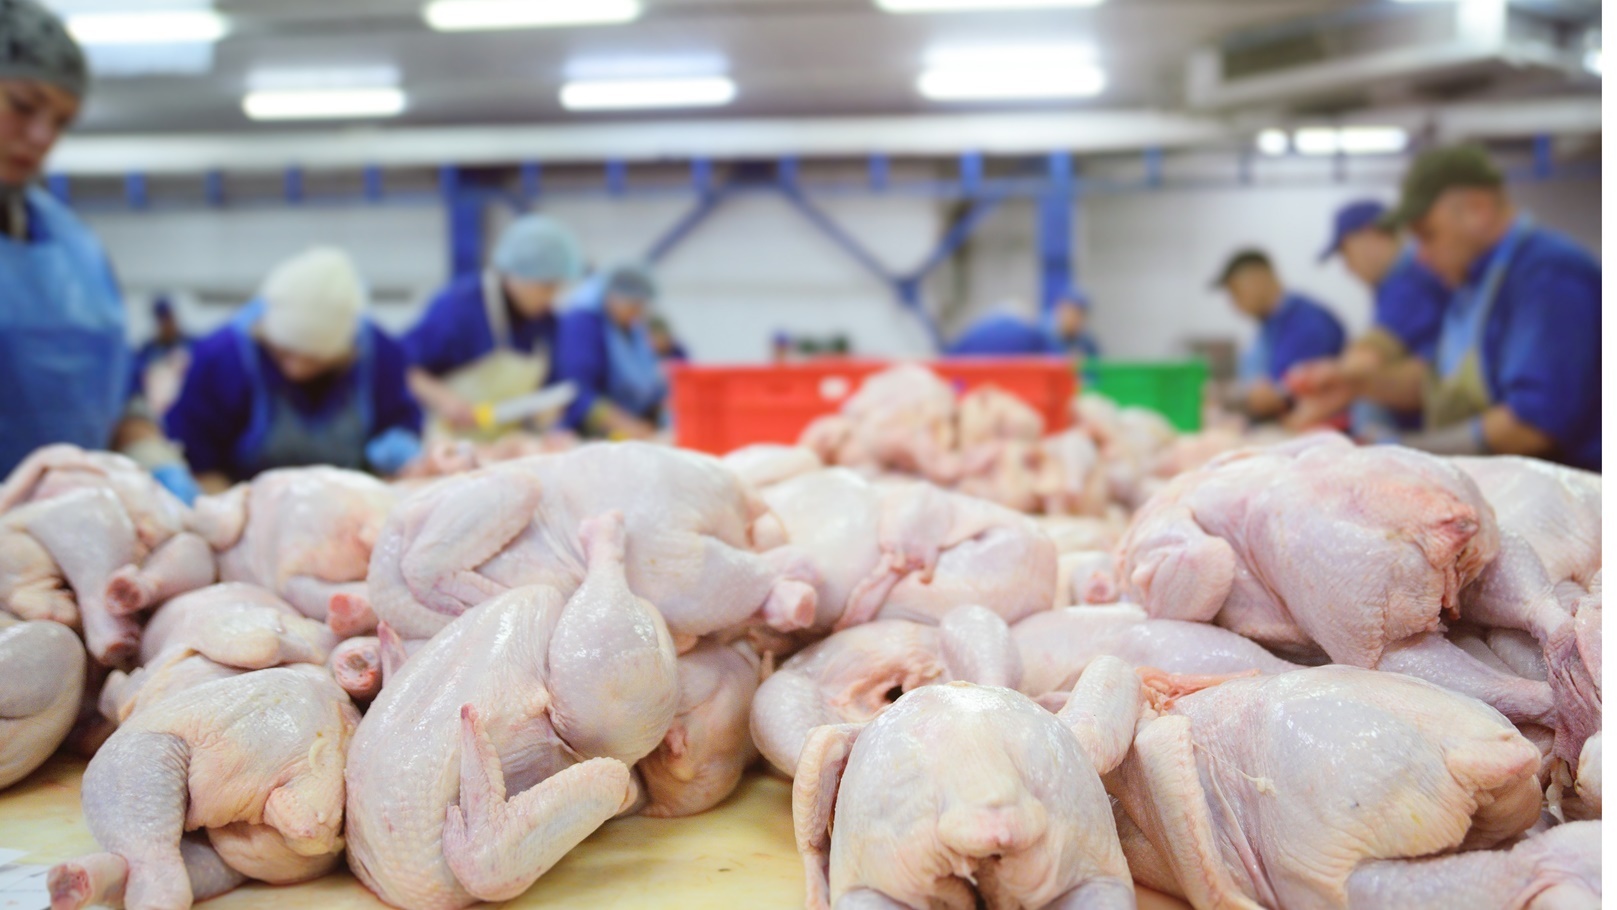 poultry-processing-14